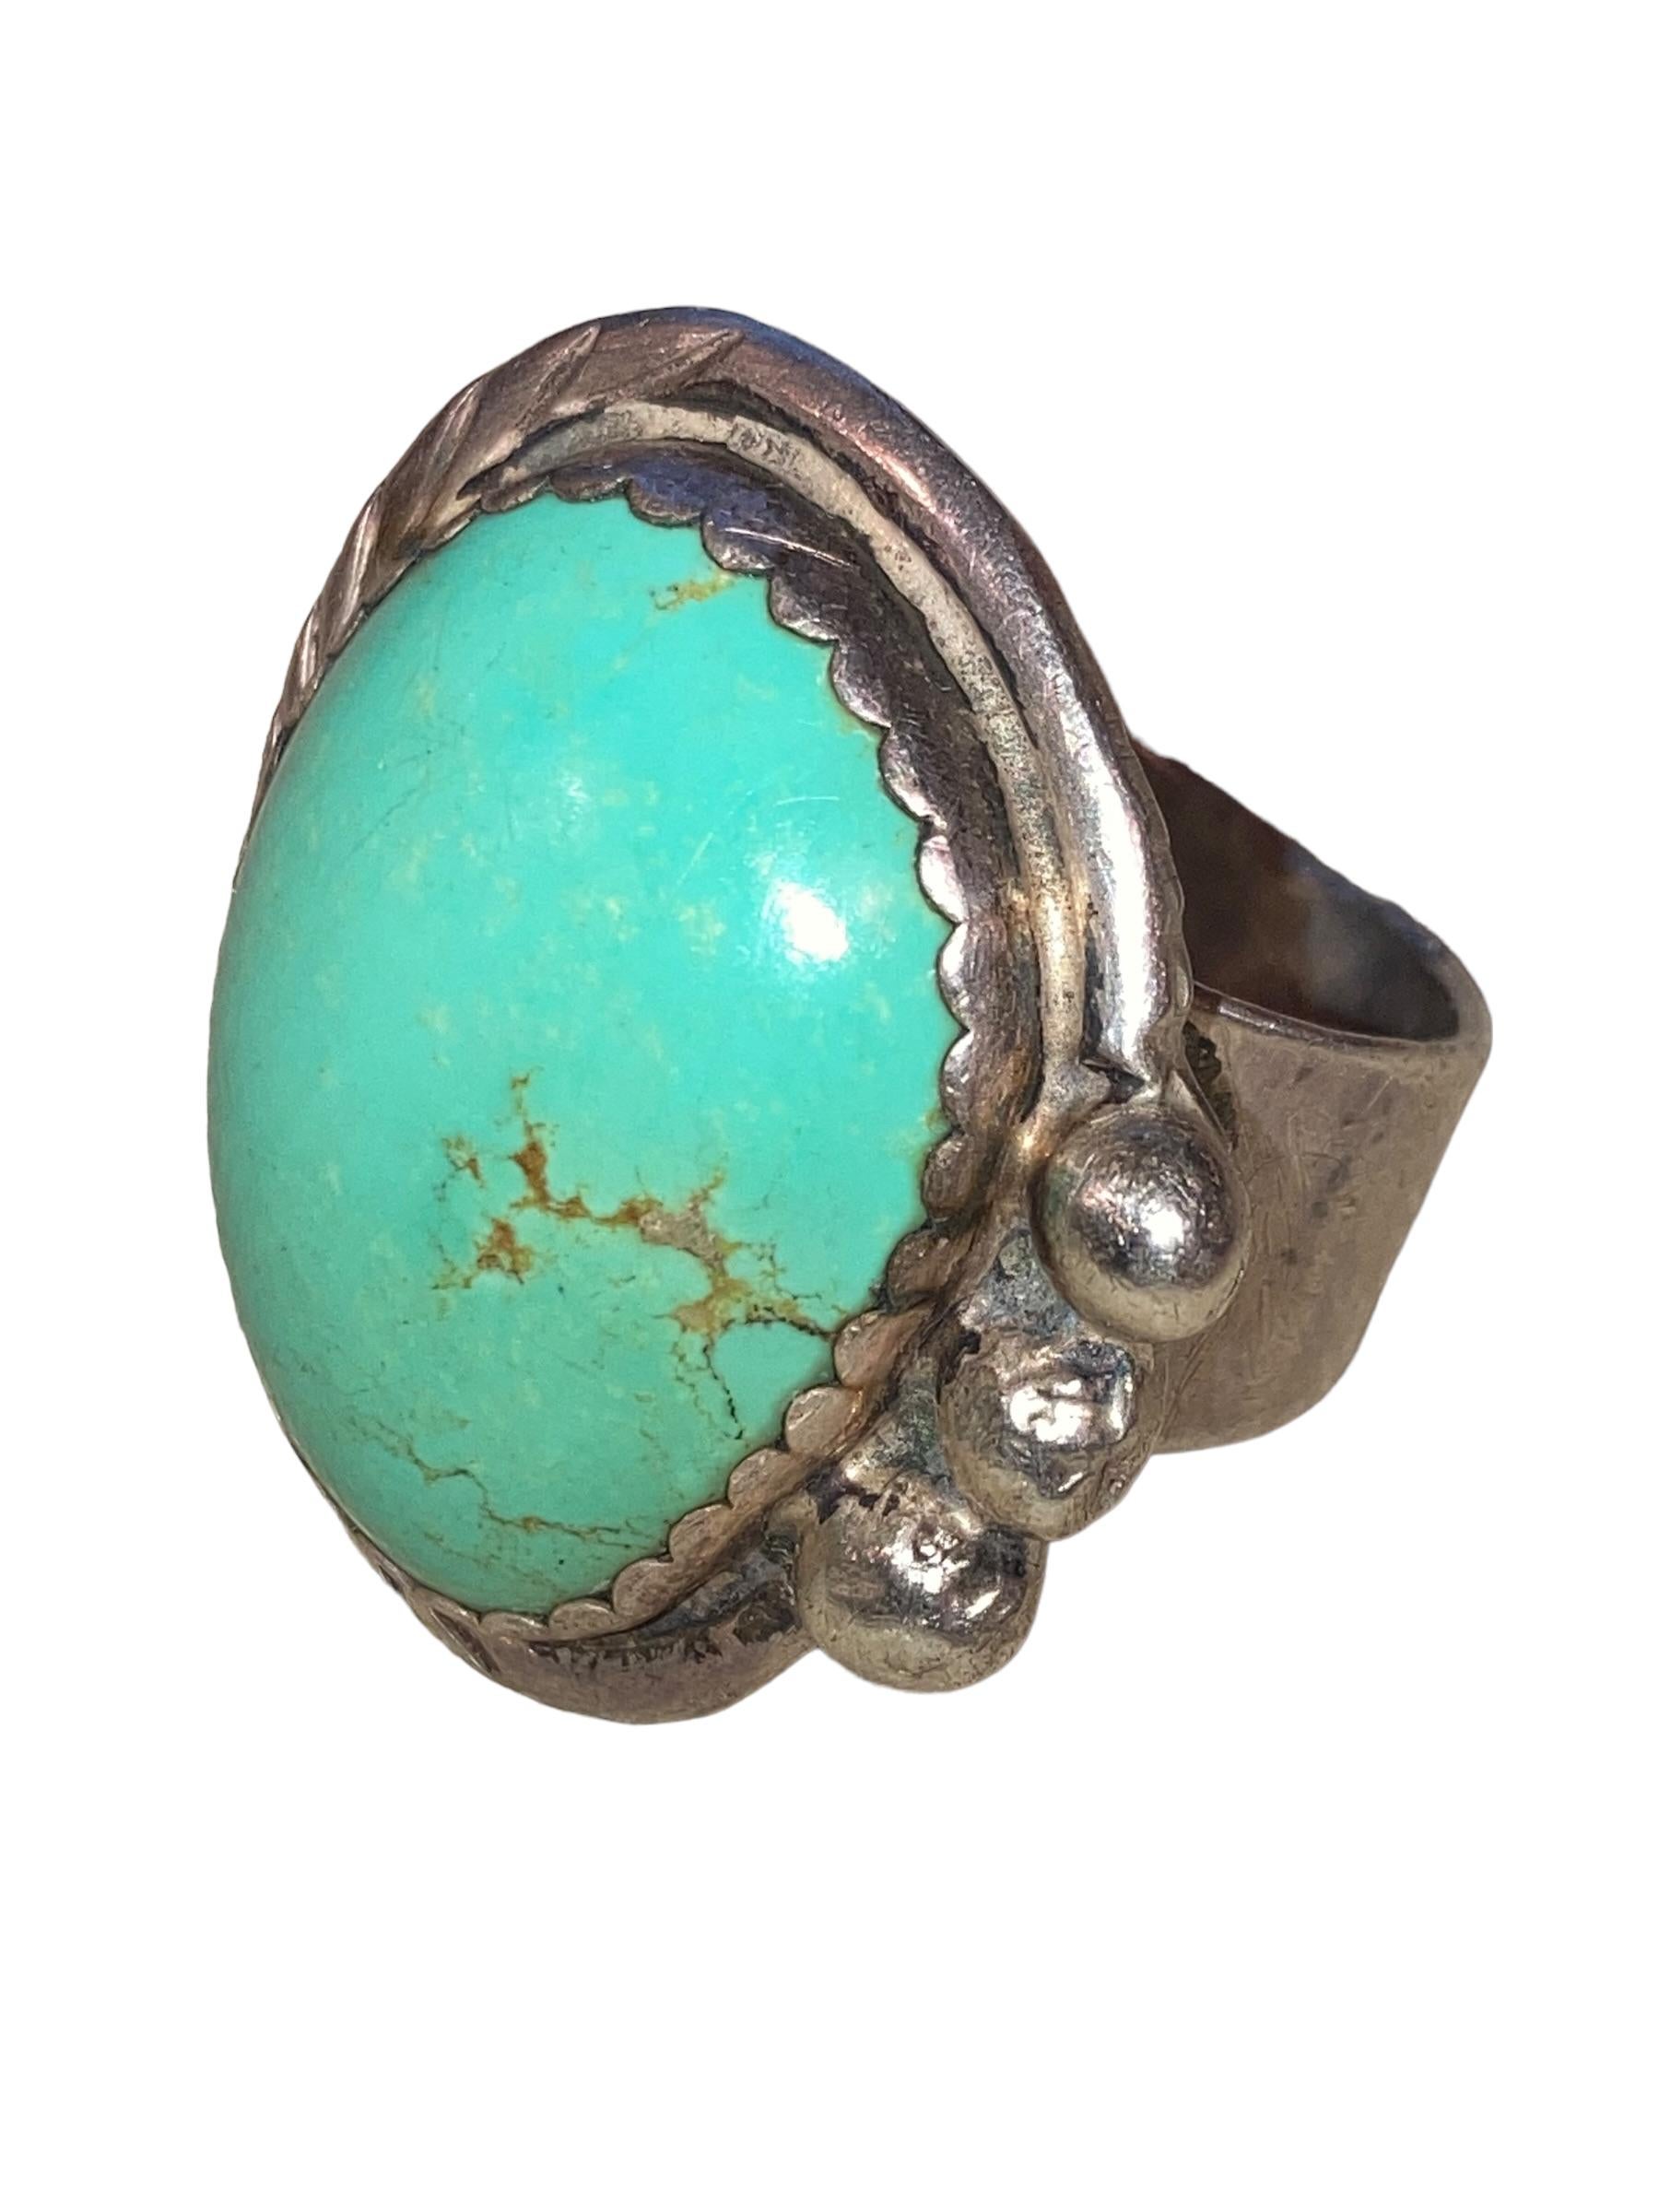 Important Men's Native American Sterling Silver Bird's Eye Turquoise Navajo Ring 1